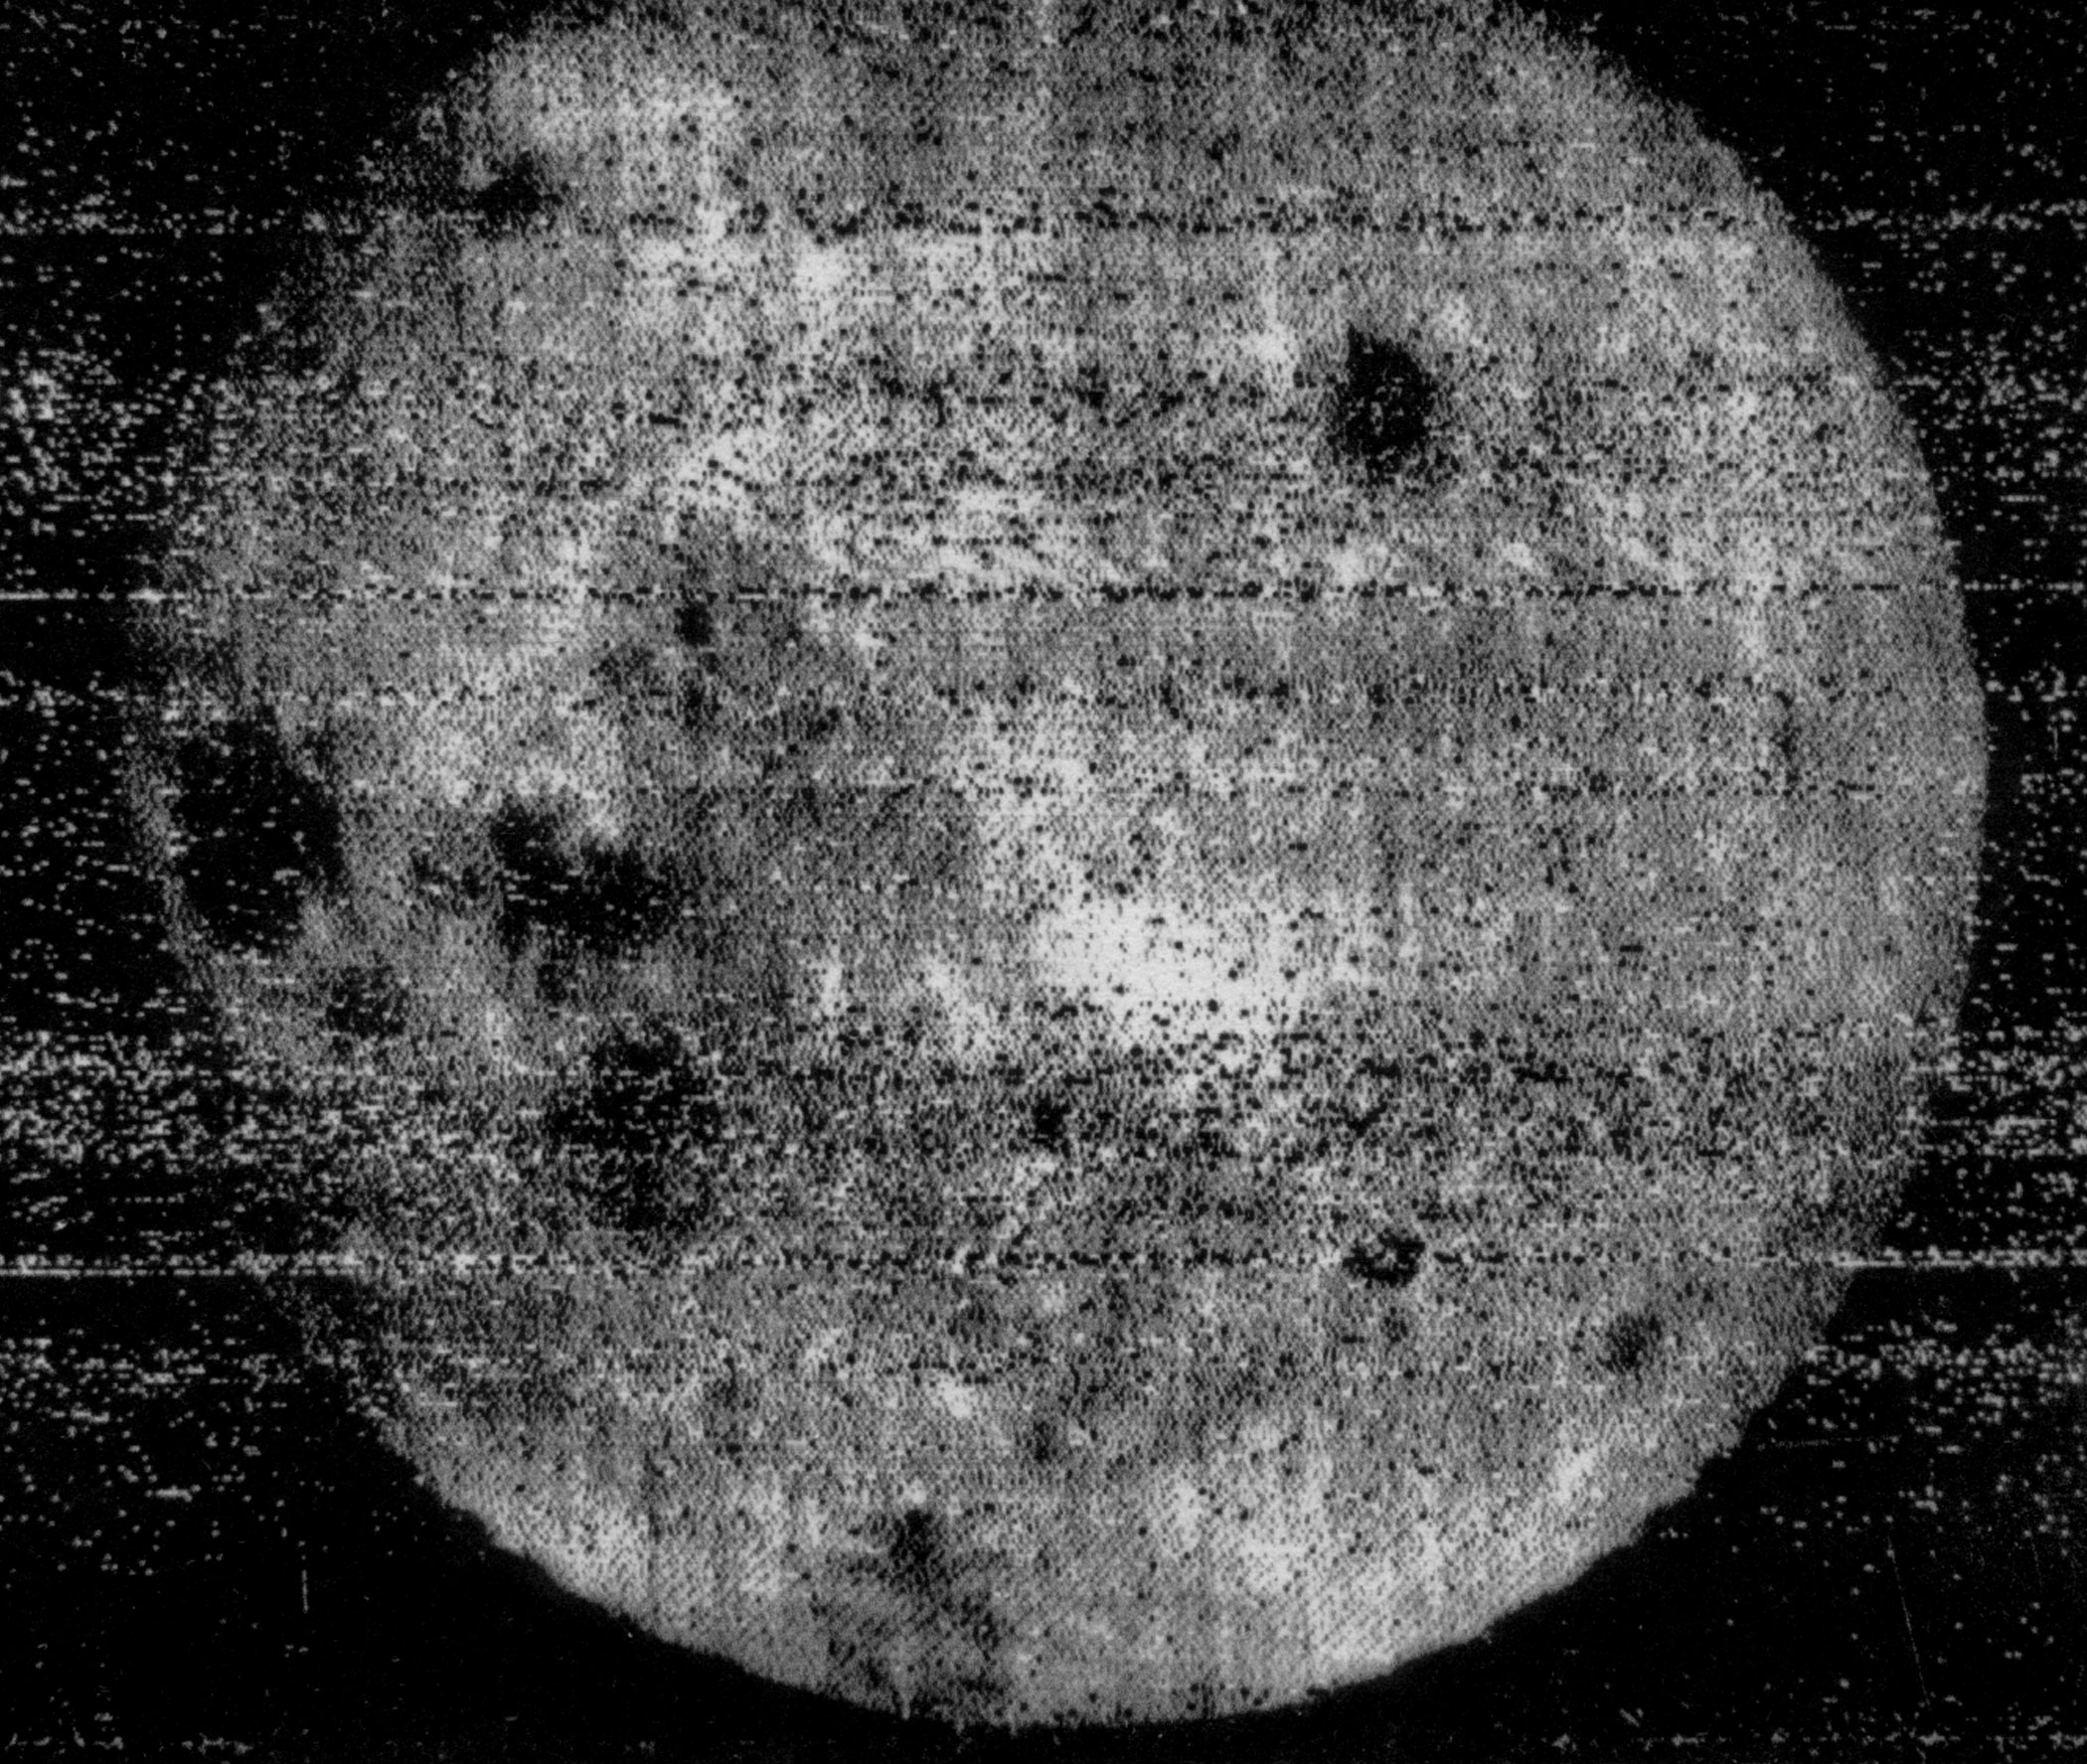 The Far Side of the Moon, 1959; Captured by the Luna 3 space craft, this image is the first views ever of the far side of the moon.